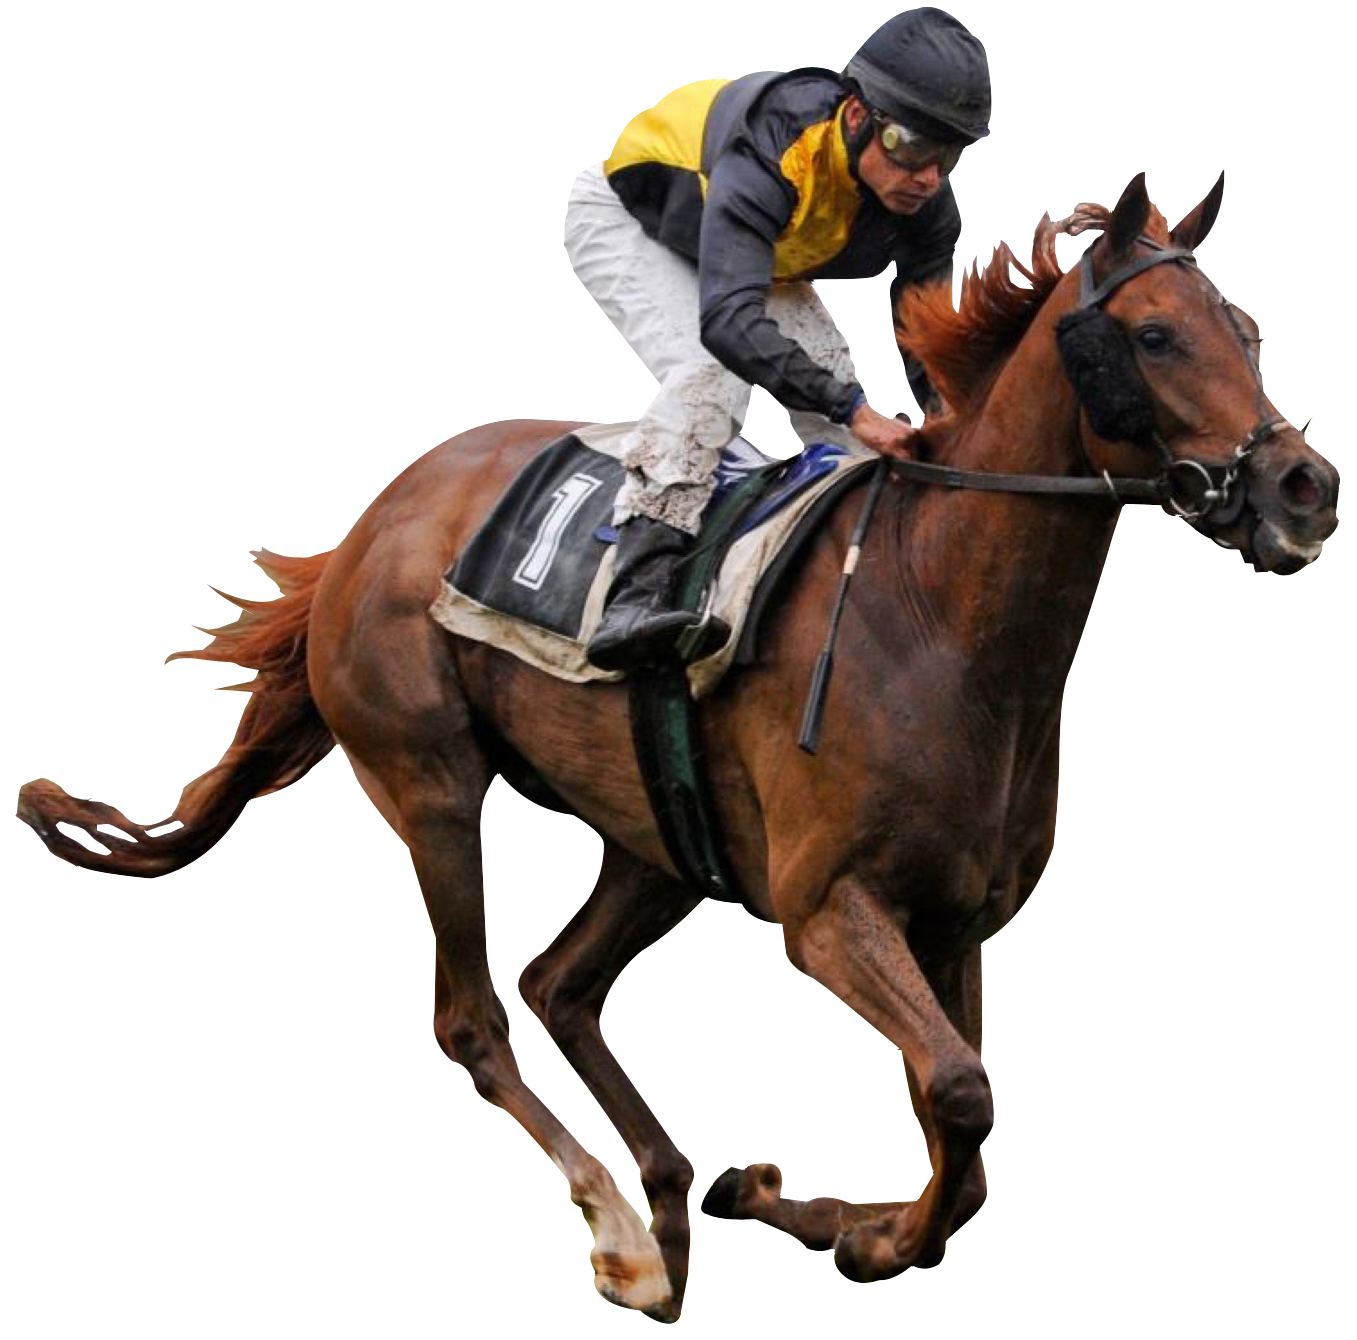 Racehorseand Jockeyin Action PNG image